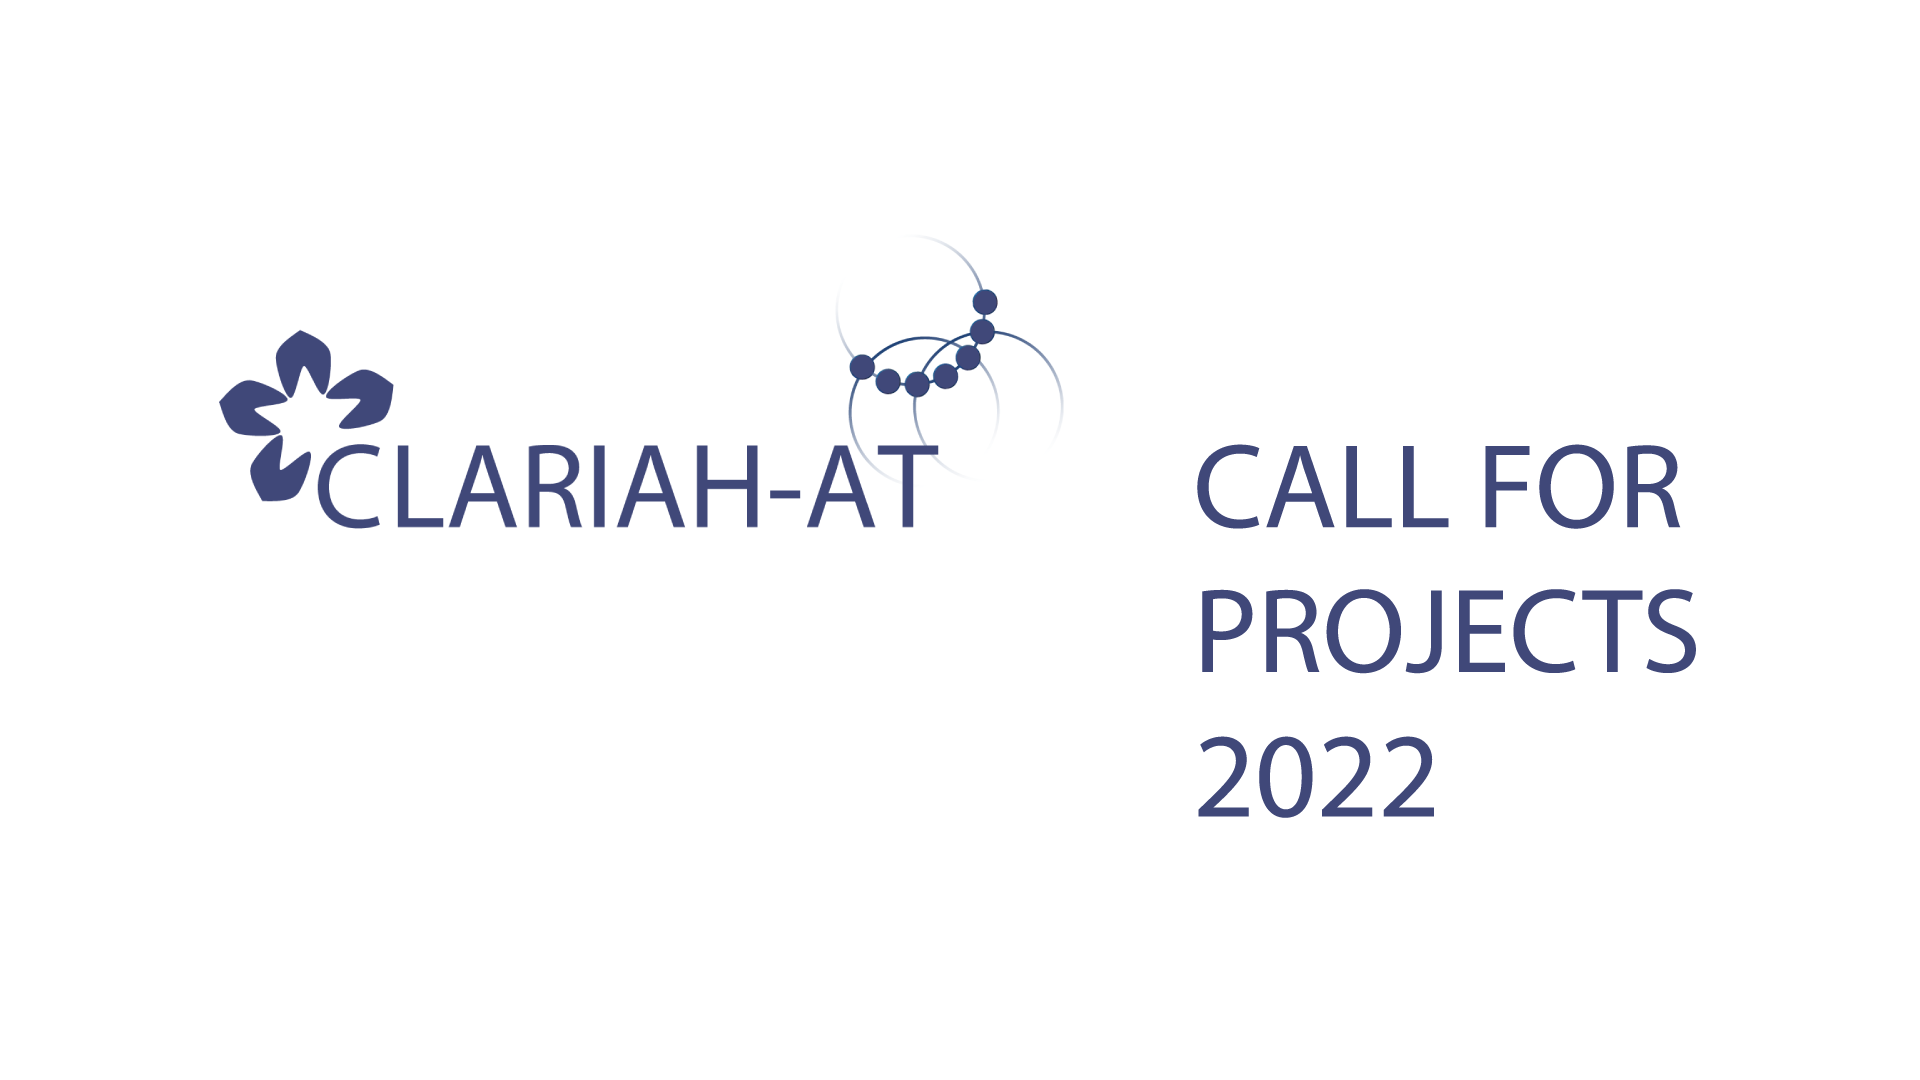 Results from Call for Projects announced